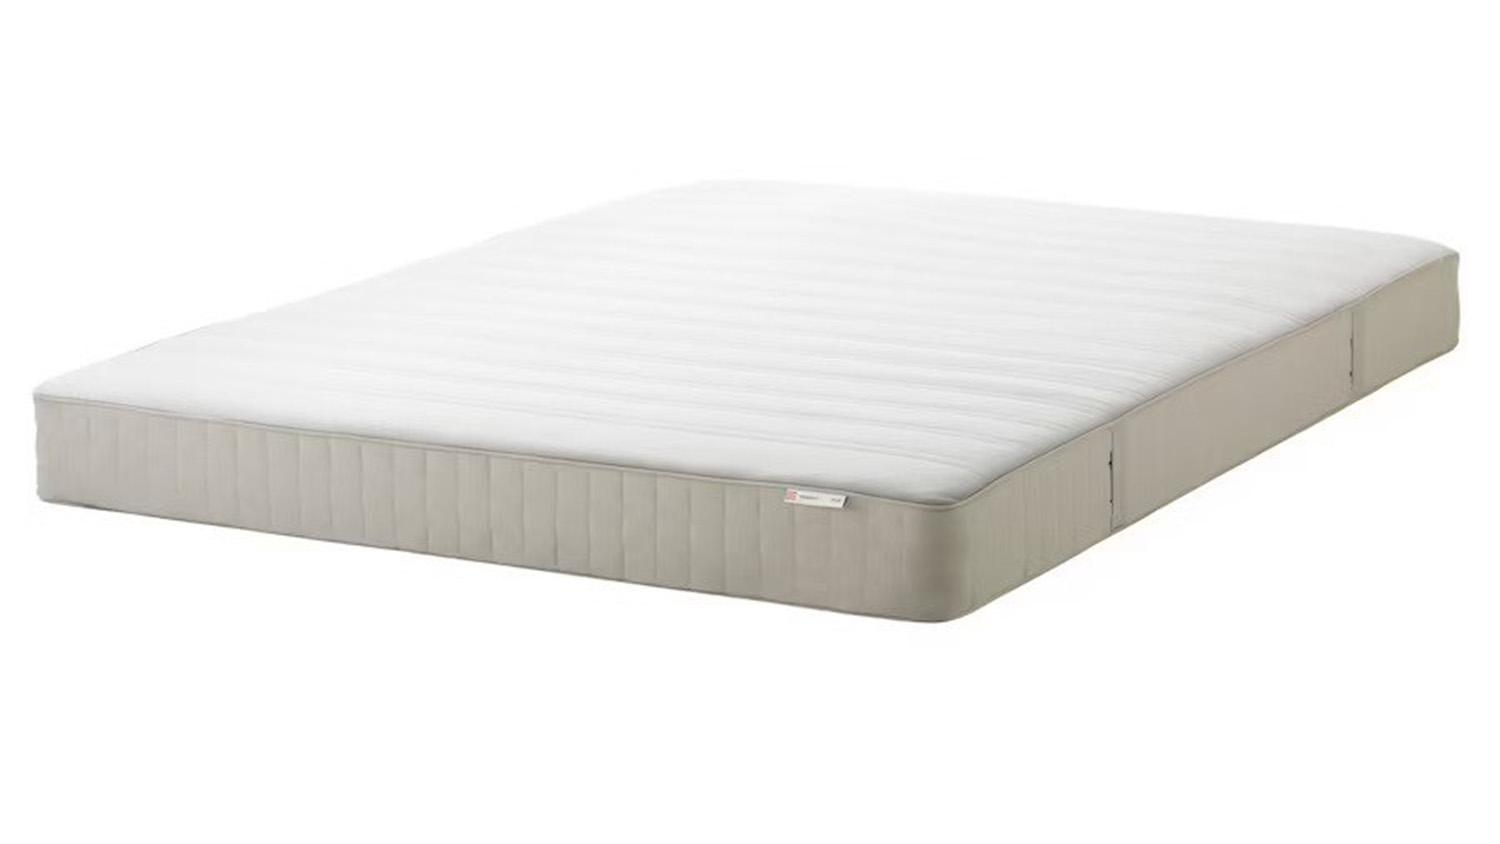 Best budget mattress: the IKEA Hasvåg Mattress shown with a cream base and white cover